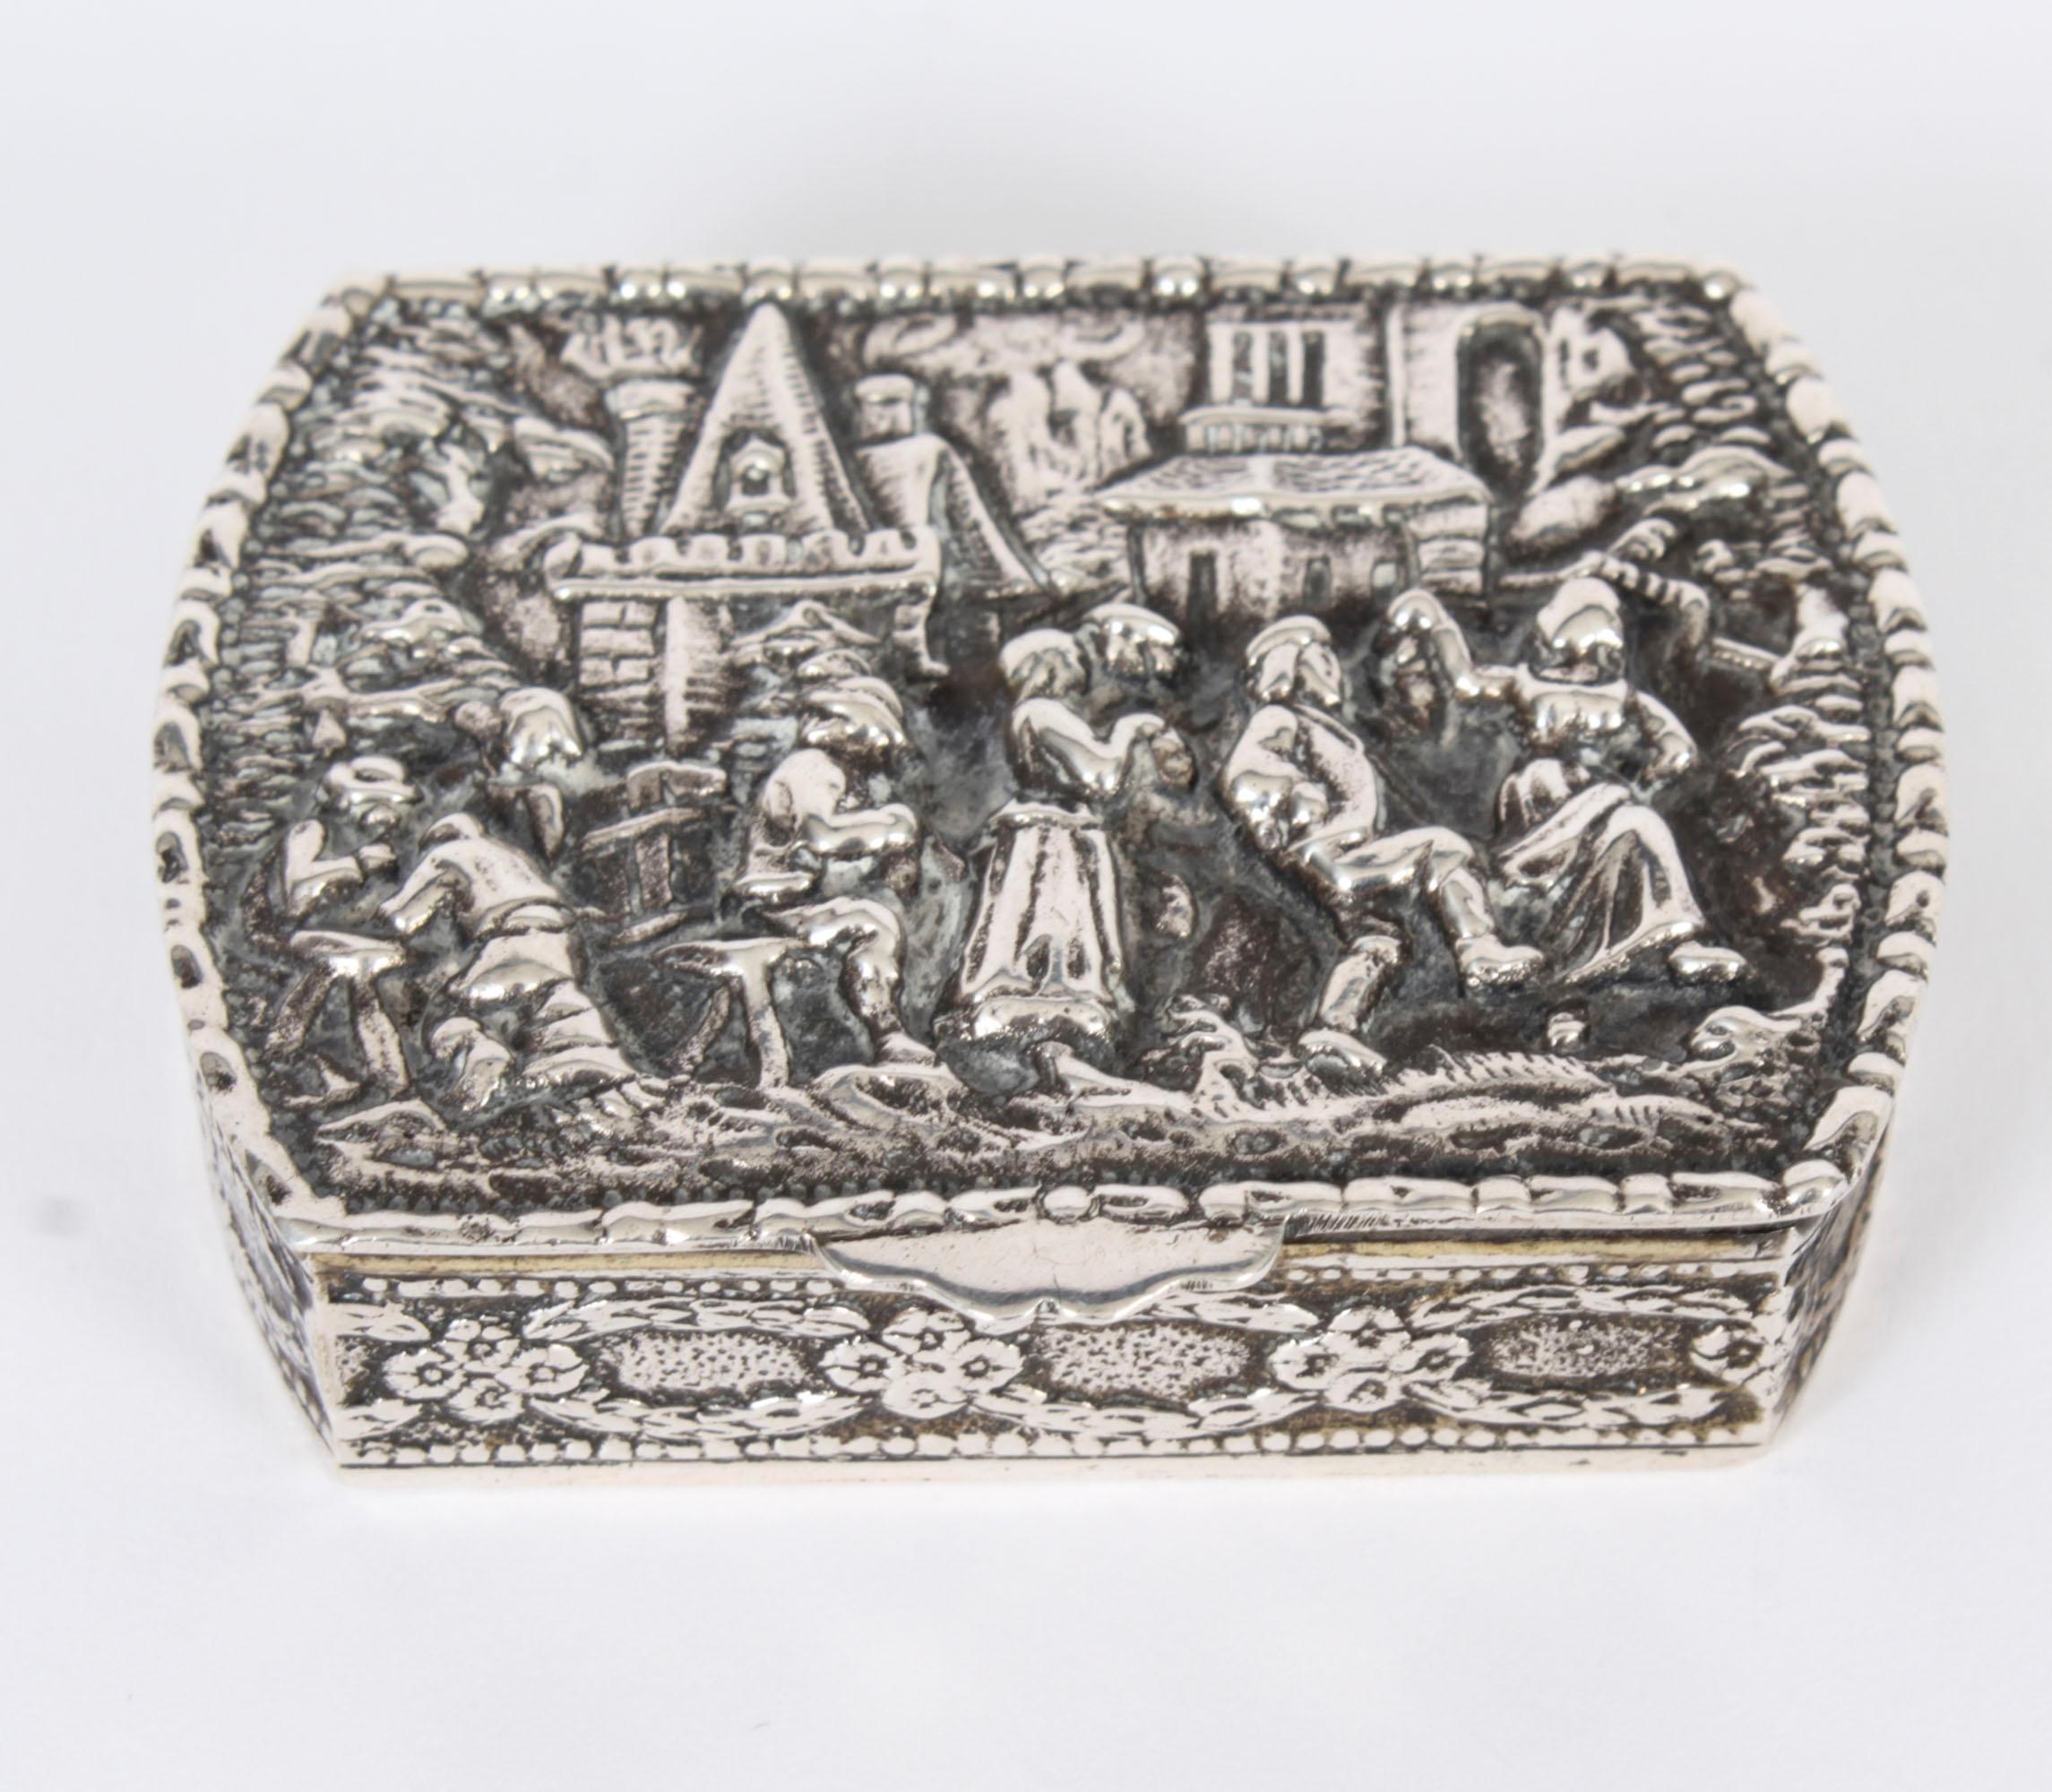 This is a wonderful heavy set antique Spanish sterling silver pill / snuff box,  bearing the Spanish 5 pointed star for sterling silver with makers mark Ucc, Circa 1900 in date.

It is decorated with repousse figural scenes of drinking and dancing.
